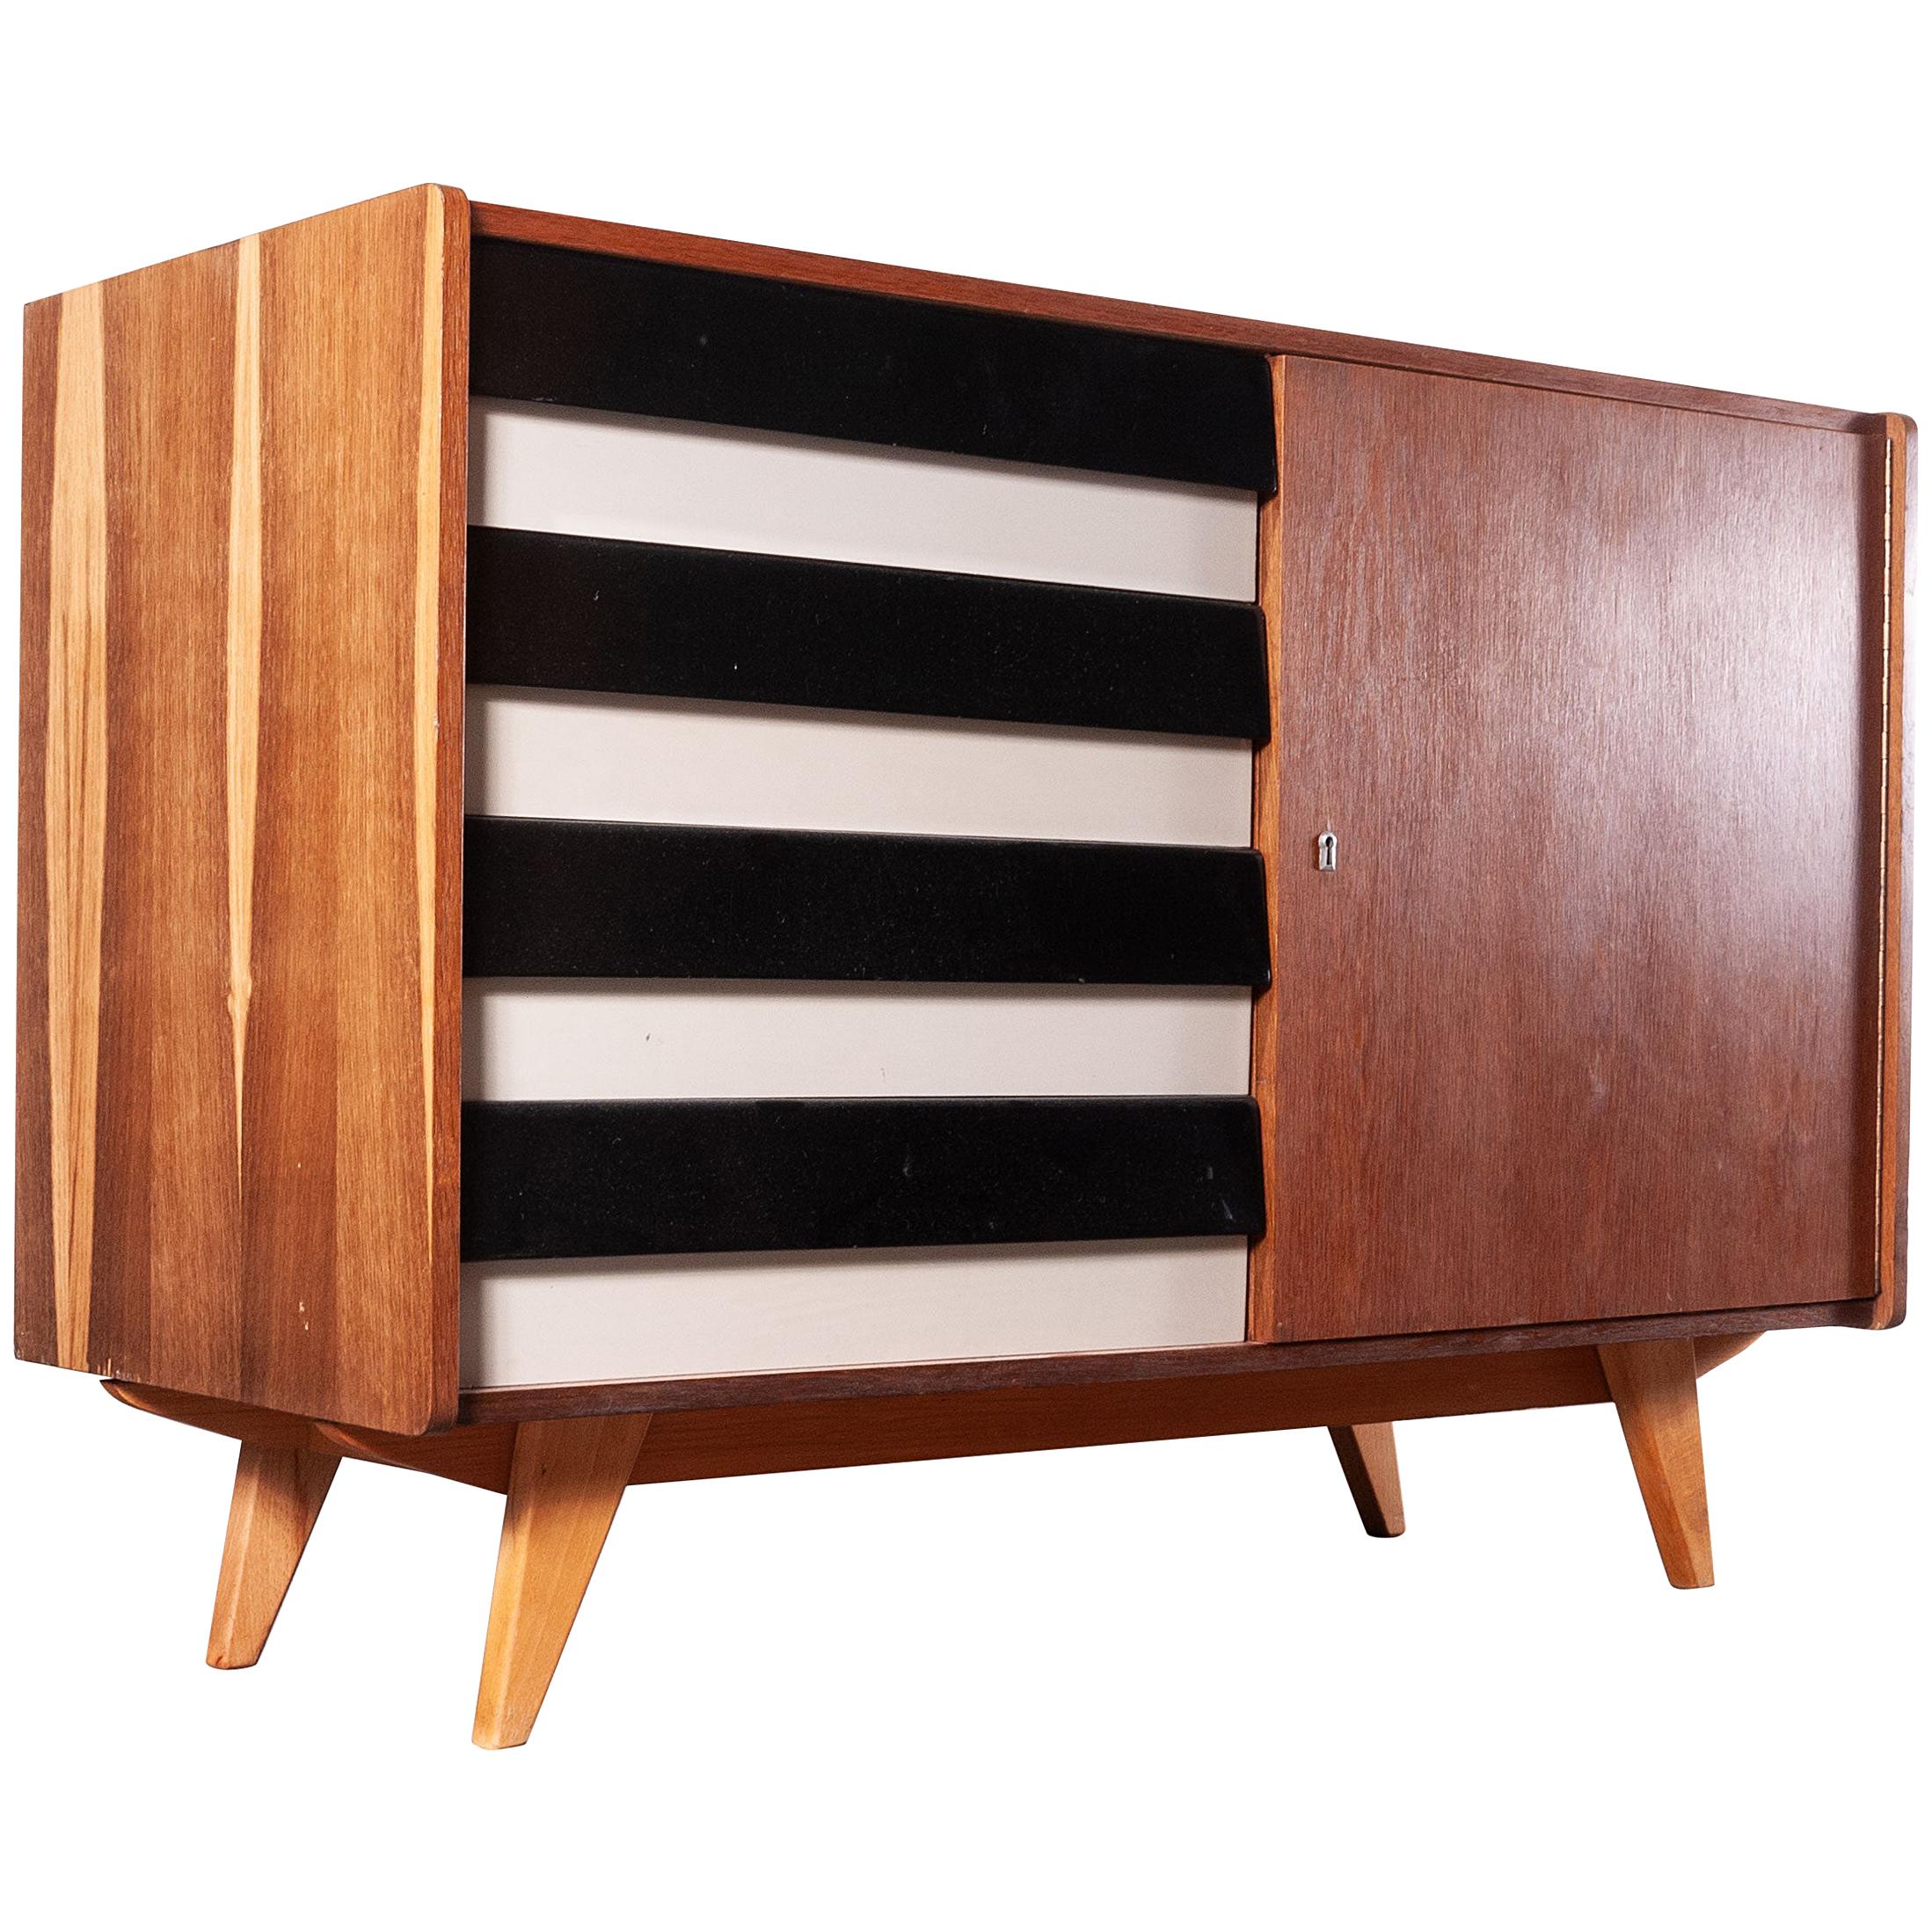 1950s Four Drawer Oak Chest Of Drawers / Cabinet  By Jiri Jiroutek For Interieu